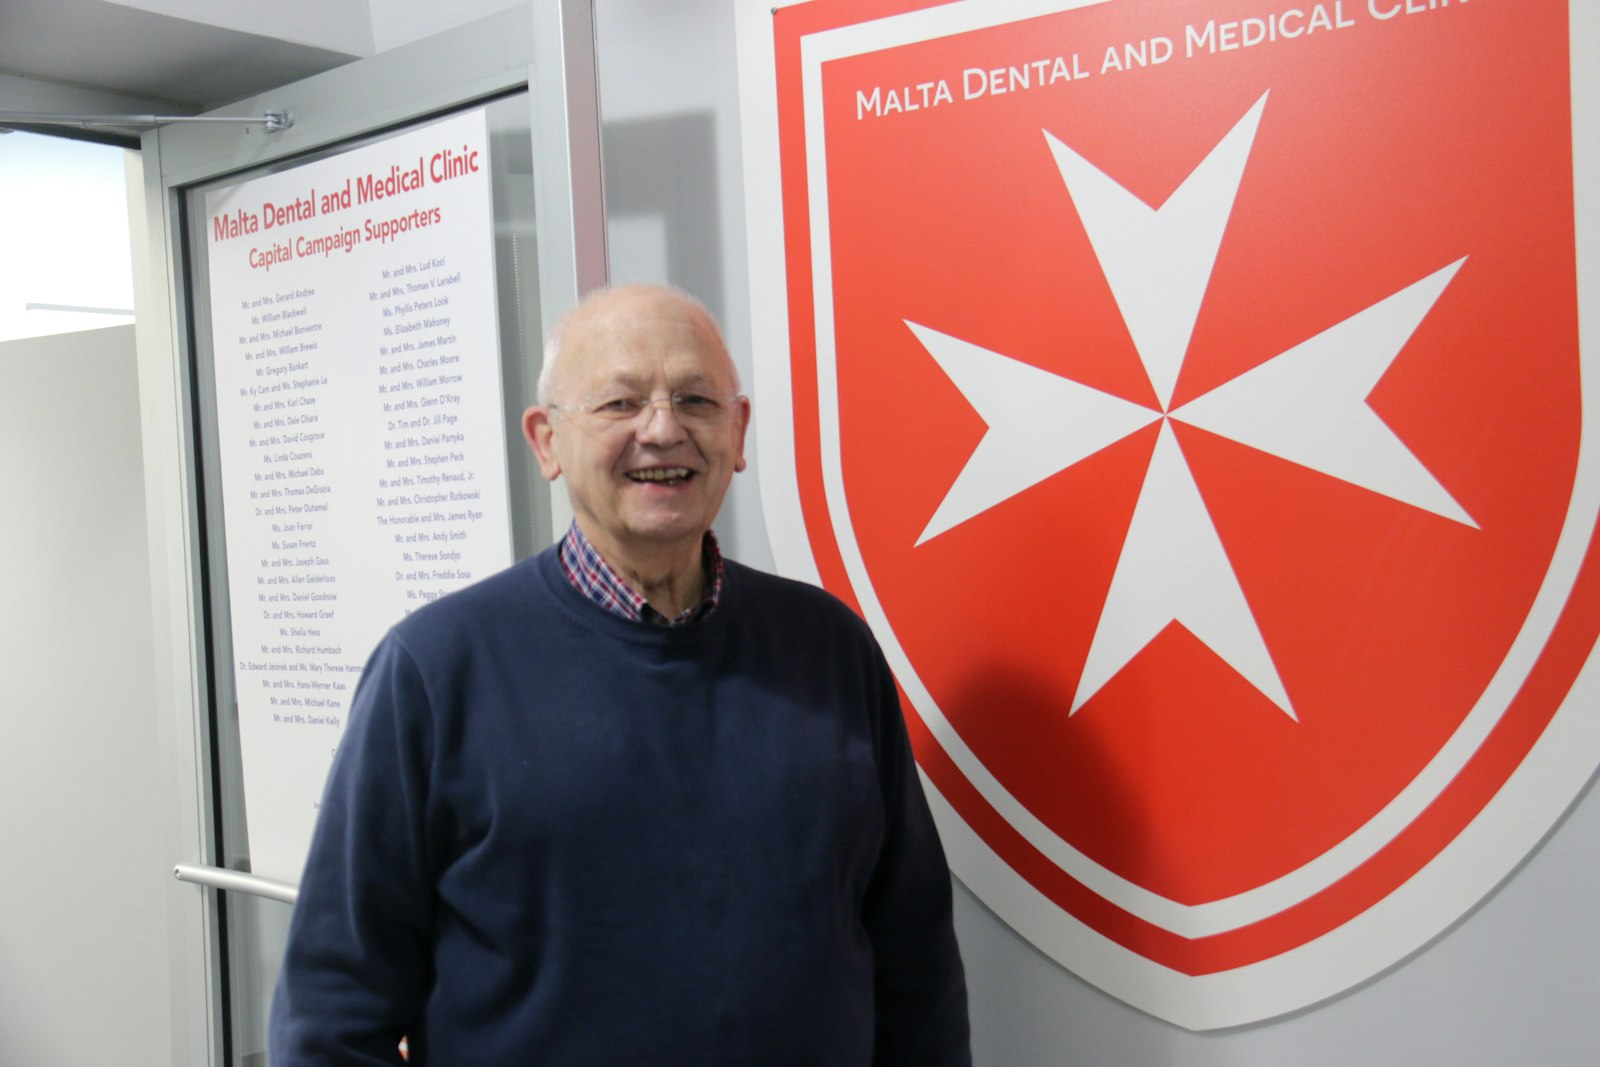 Thomas Larabell, president of the Malta Dental and Medical Clinic, said the addition of an eye clinic to Malta's services was made possible by the clinic moving to the Center for the Works of Mercy in June 2021.